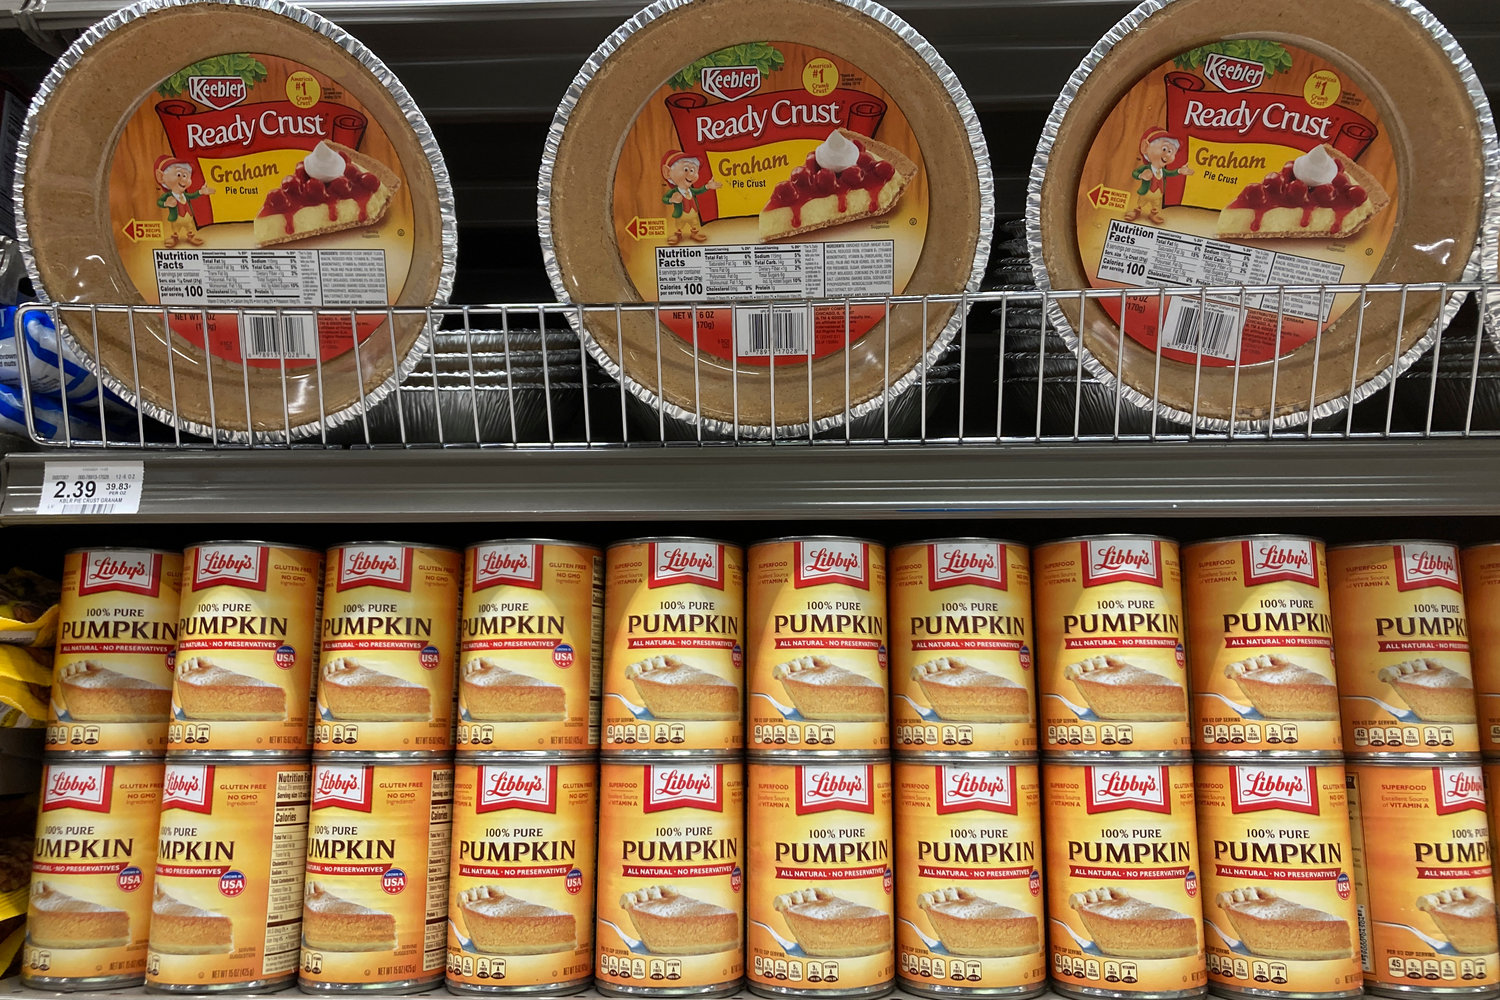 File - Canned pumpkin and graham cracker shell crusts are displayed at a Publix Supermarket, Tuesday, Nov. 16, 2021 in North Miami, Fla. Americans are bracing for a costly Thanksgiving this year, with double-digit percent increases in the price of turkey, potatoes, stuffing, canned pumpkin and other staples. (AP Photo/Marta Lavandier, File)